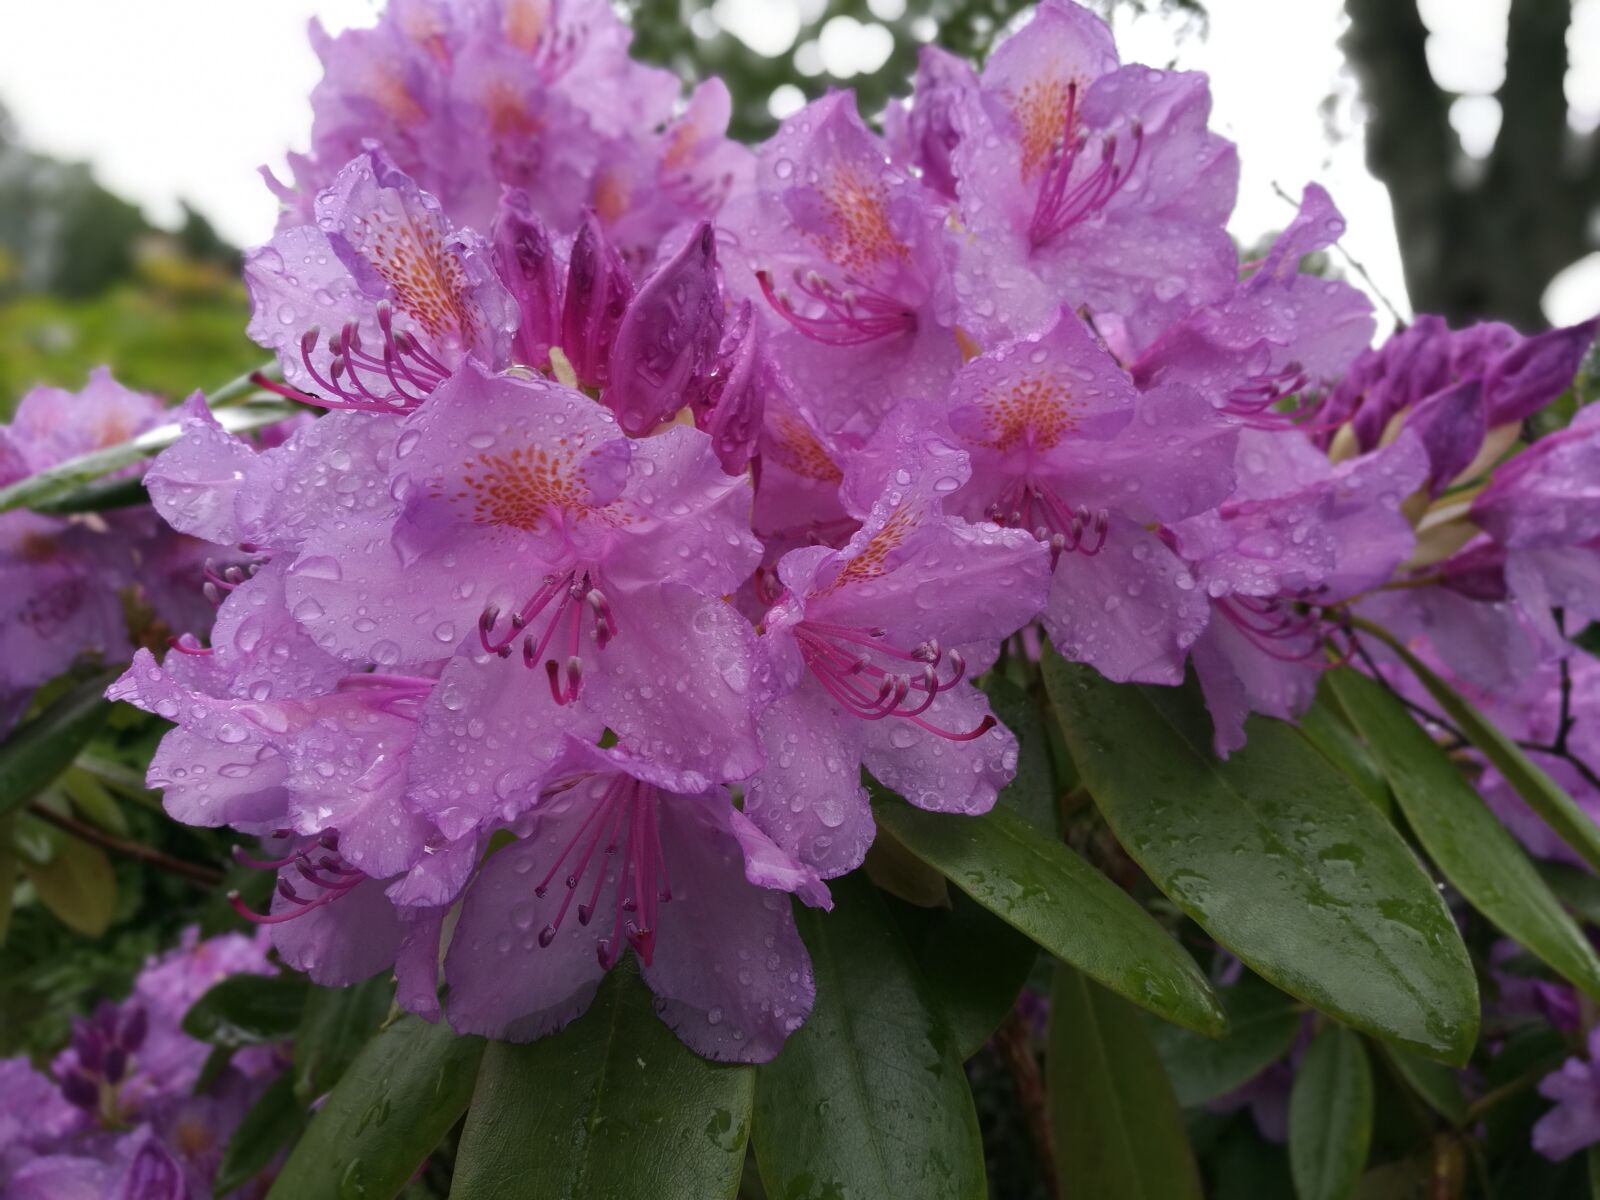 HUAWEI Honor 8 sample photo. Rhododendron, flower, petal photography